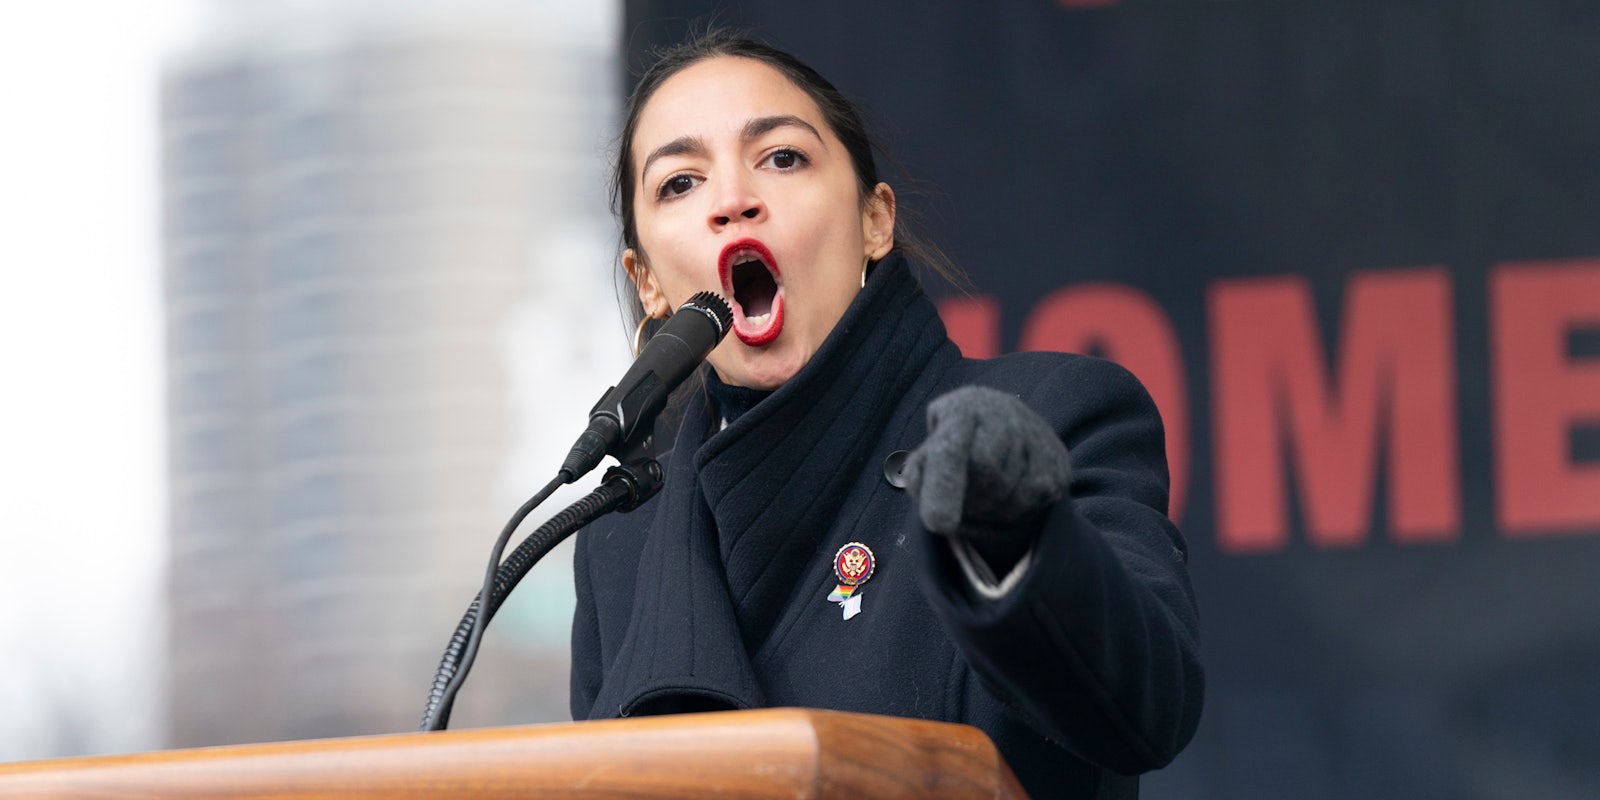 Alexandria Ocasio-Cortez United States Representative speaking into microphone hand pointed out